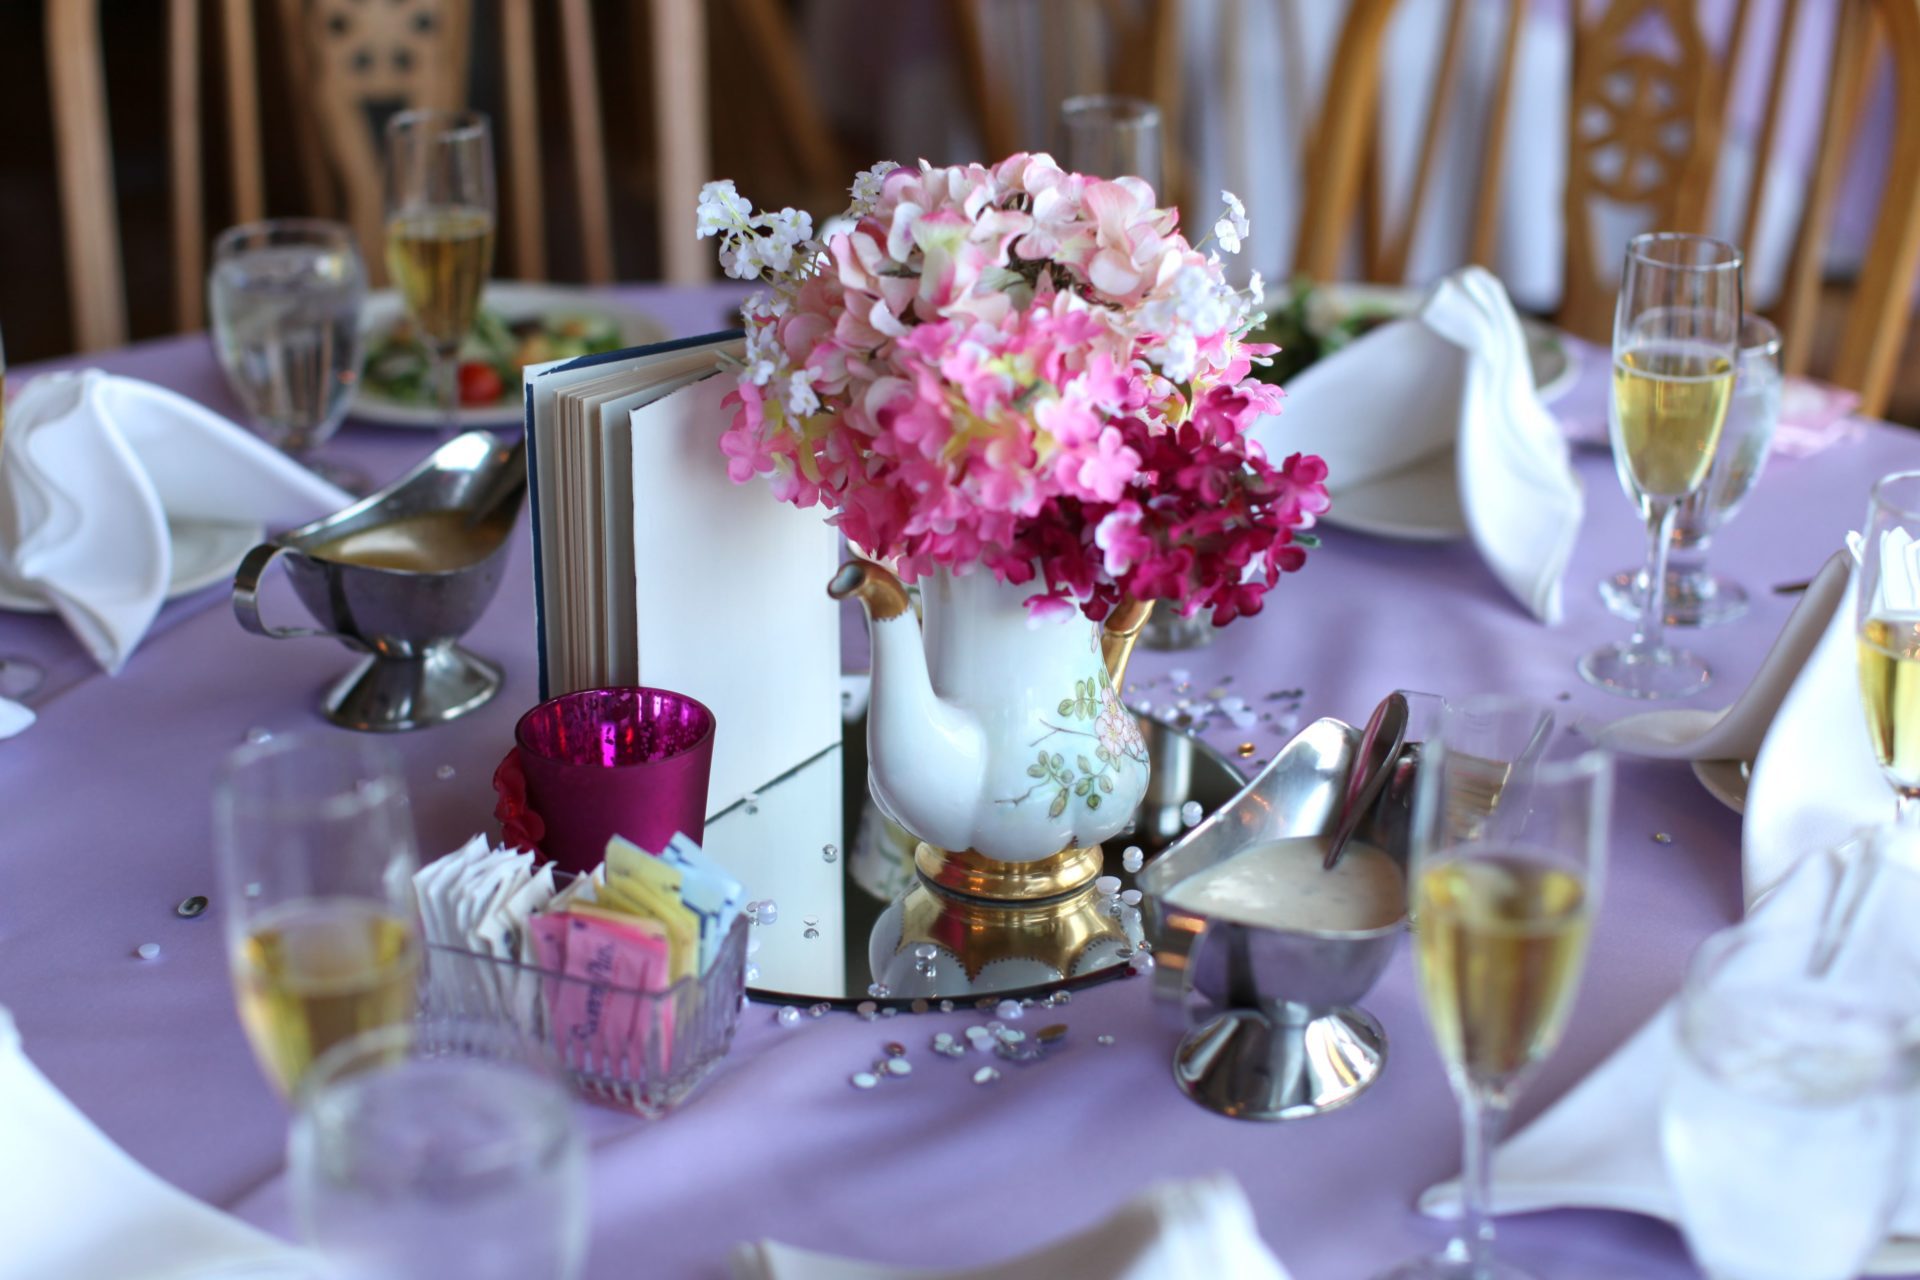 tea party theme wedding centerpiece with tea kettle with flowers